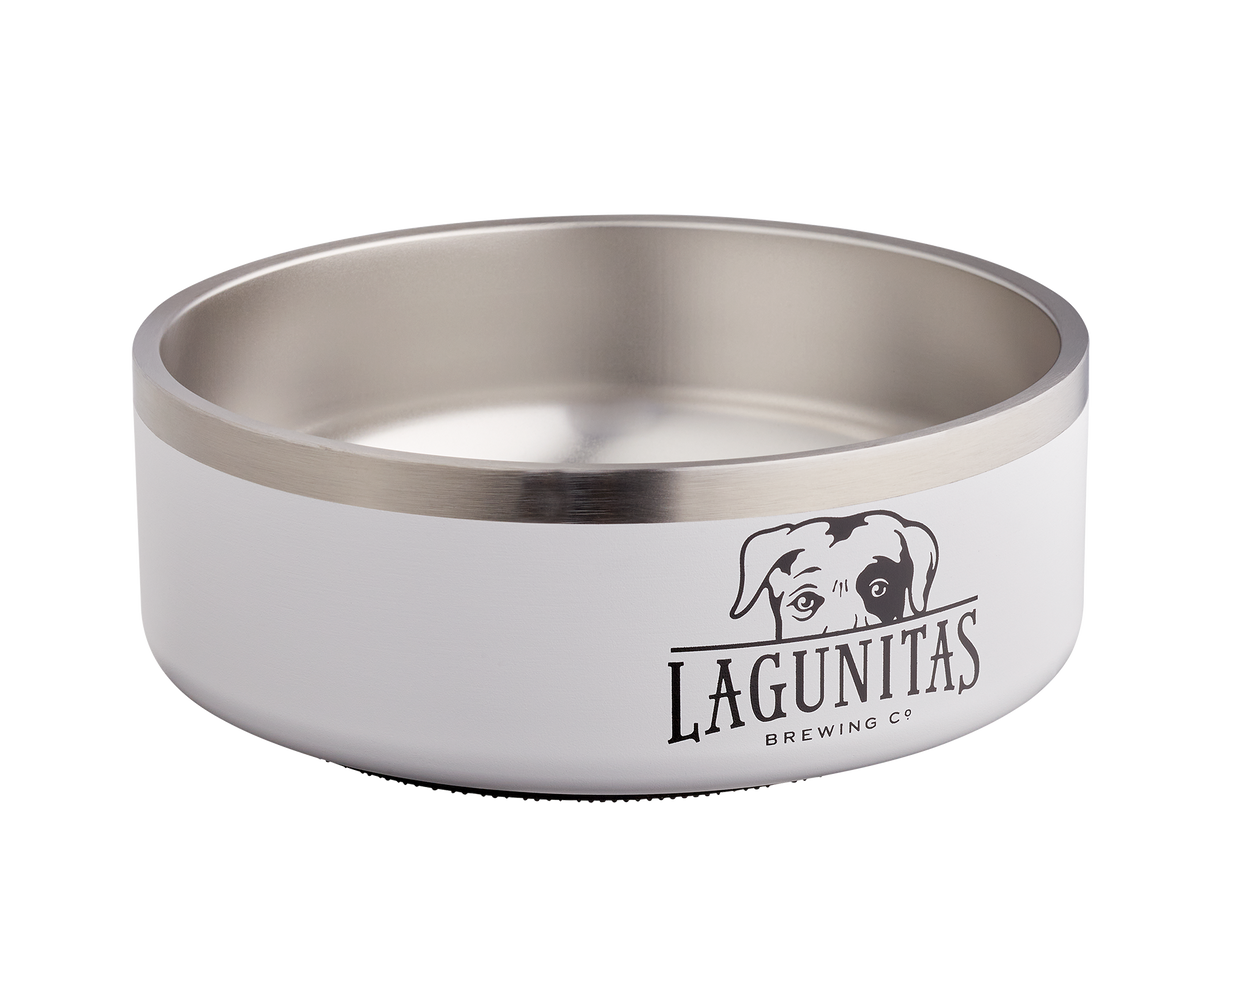  "Lagunitas Doggo Bowl: A sleek white dog bowl with the Lagunitas logo in black, ideal for making mealtime fun and stylish for your furry friend. Perfect for the fashion-forward pup who loves to stand out at home or in the park."